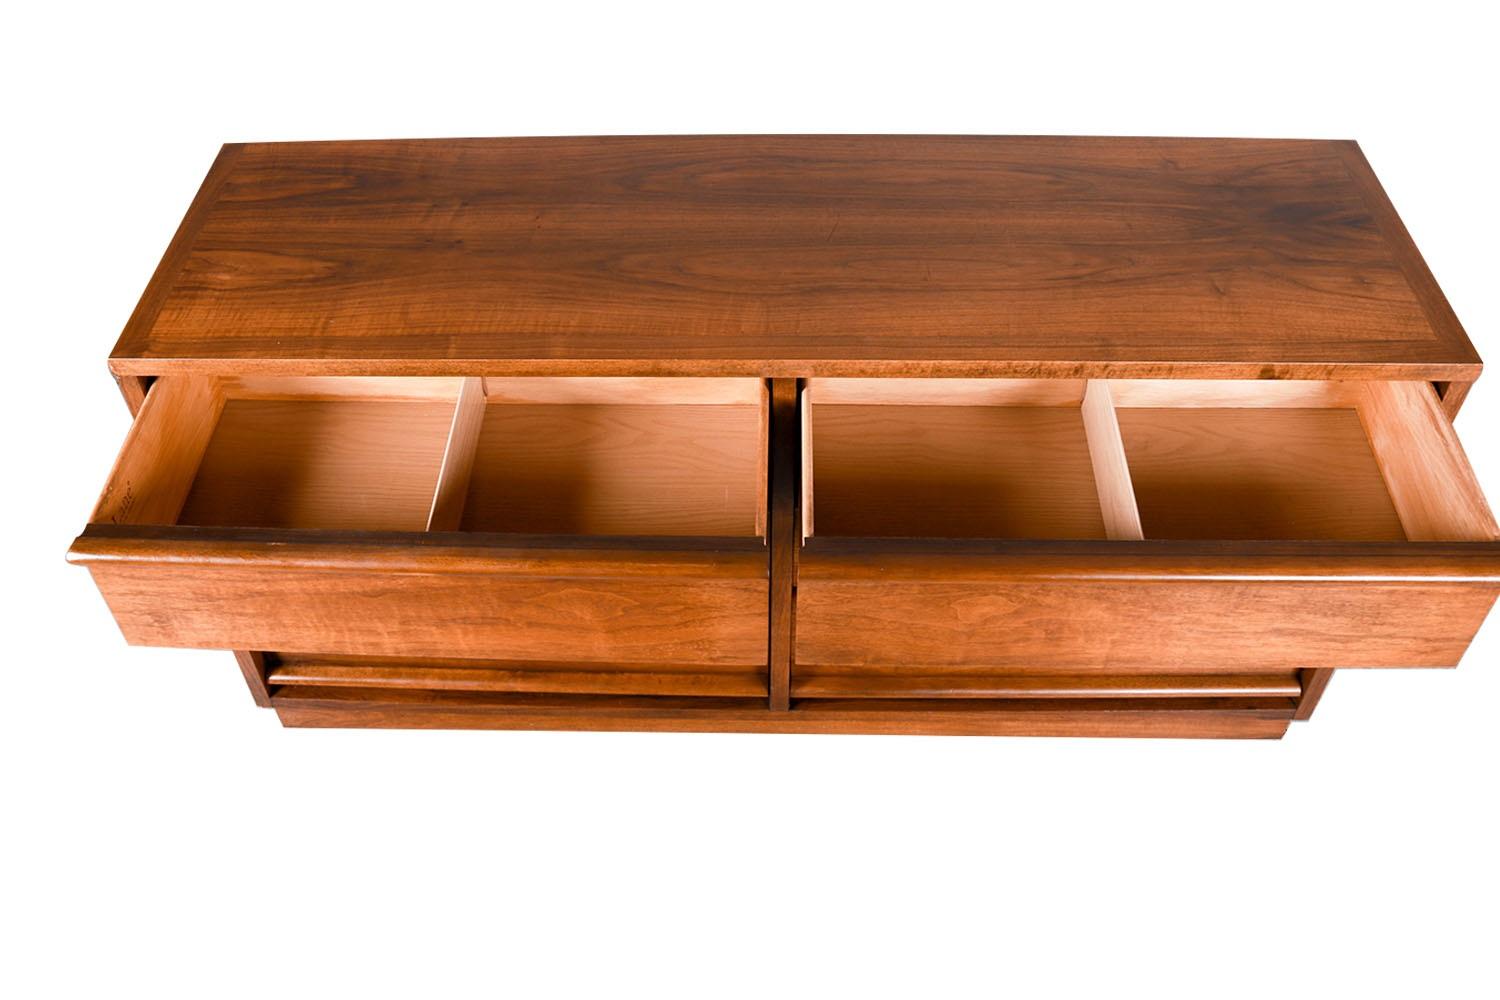 This is a beautiful example of mid-century craftsmanship by Lane furniture. This dresser is part of the Rhythm collection by Lane, built in the 1960’s, to have a style that was timeless then, and still is today. This retro piece was constructed with